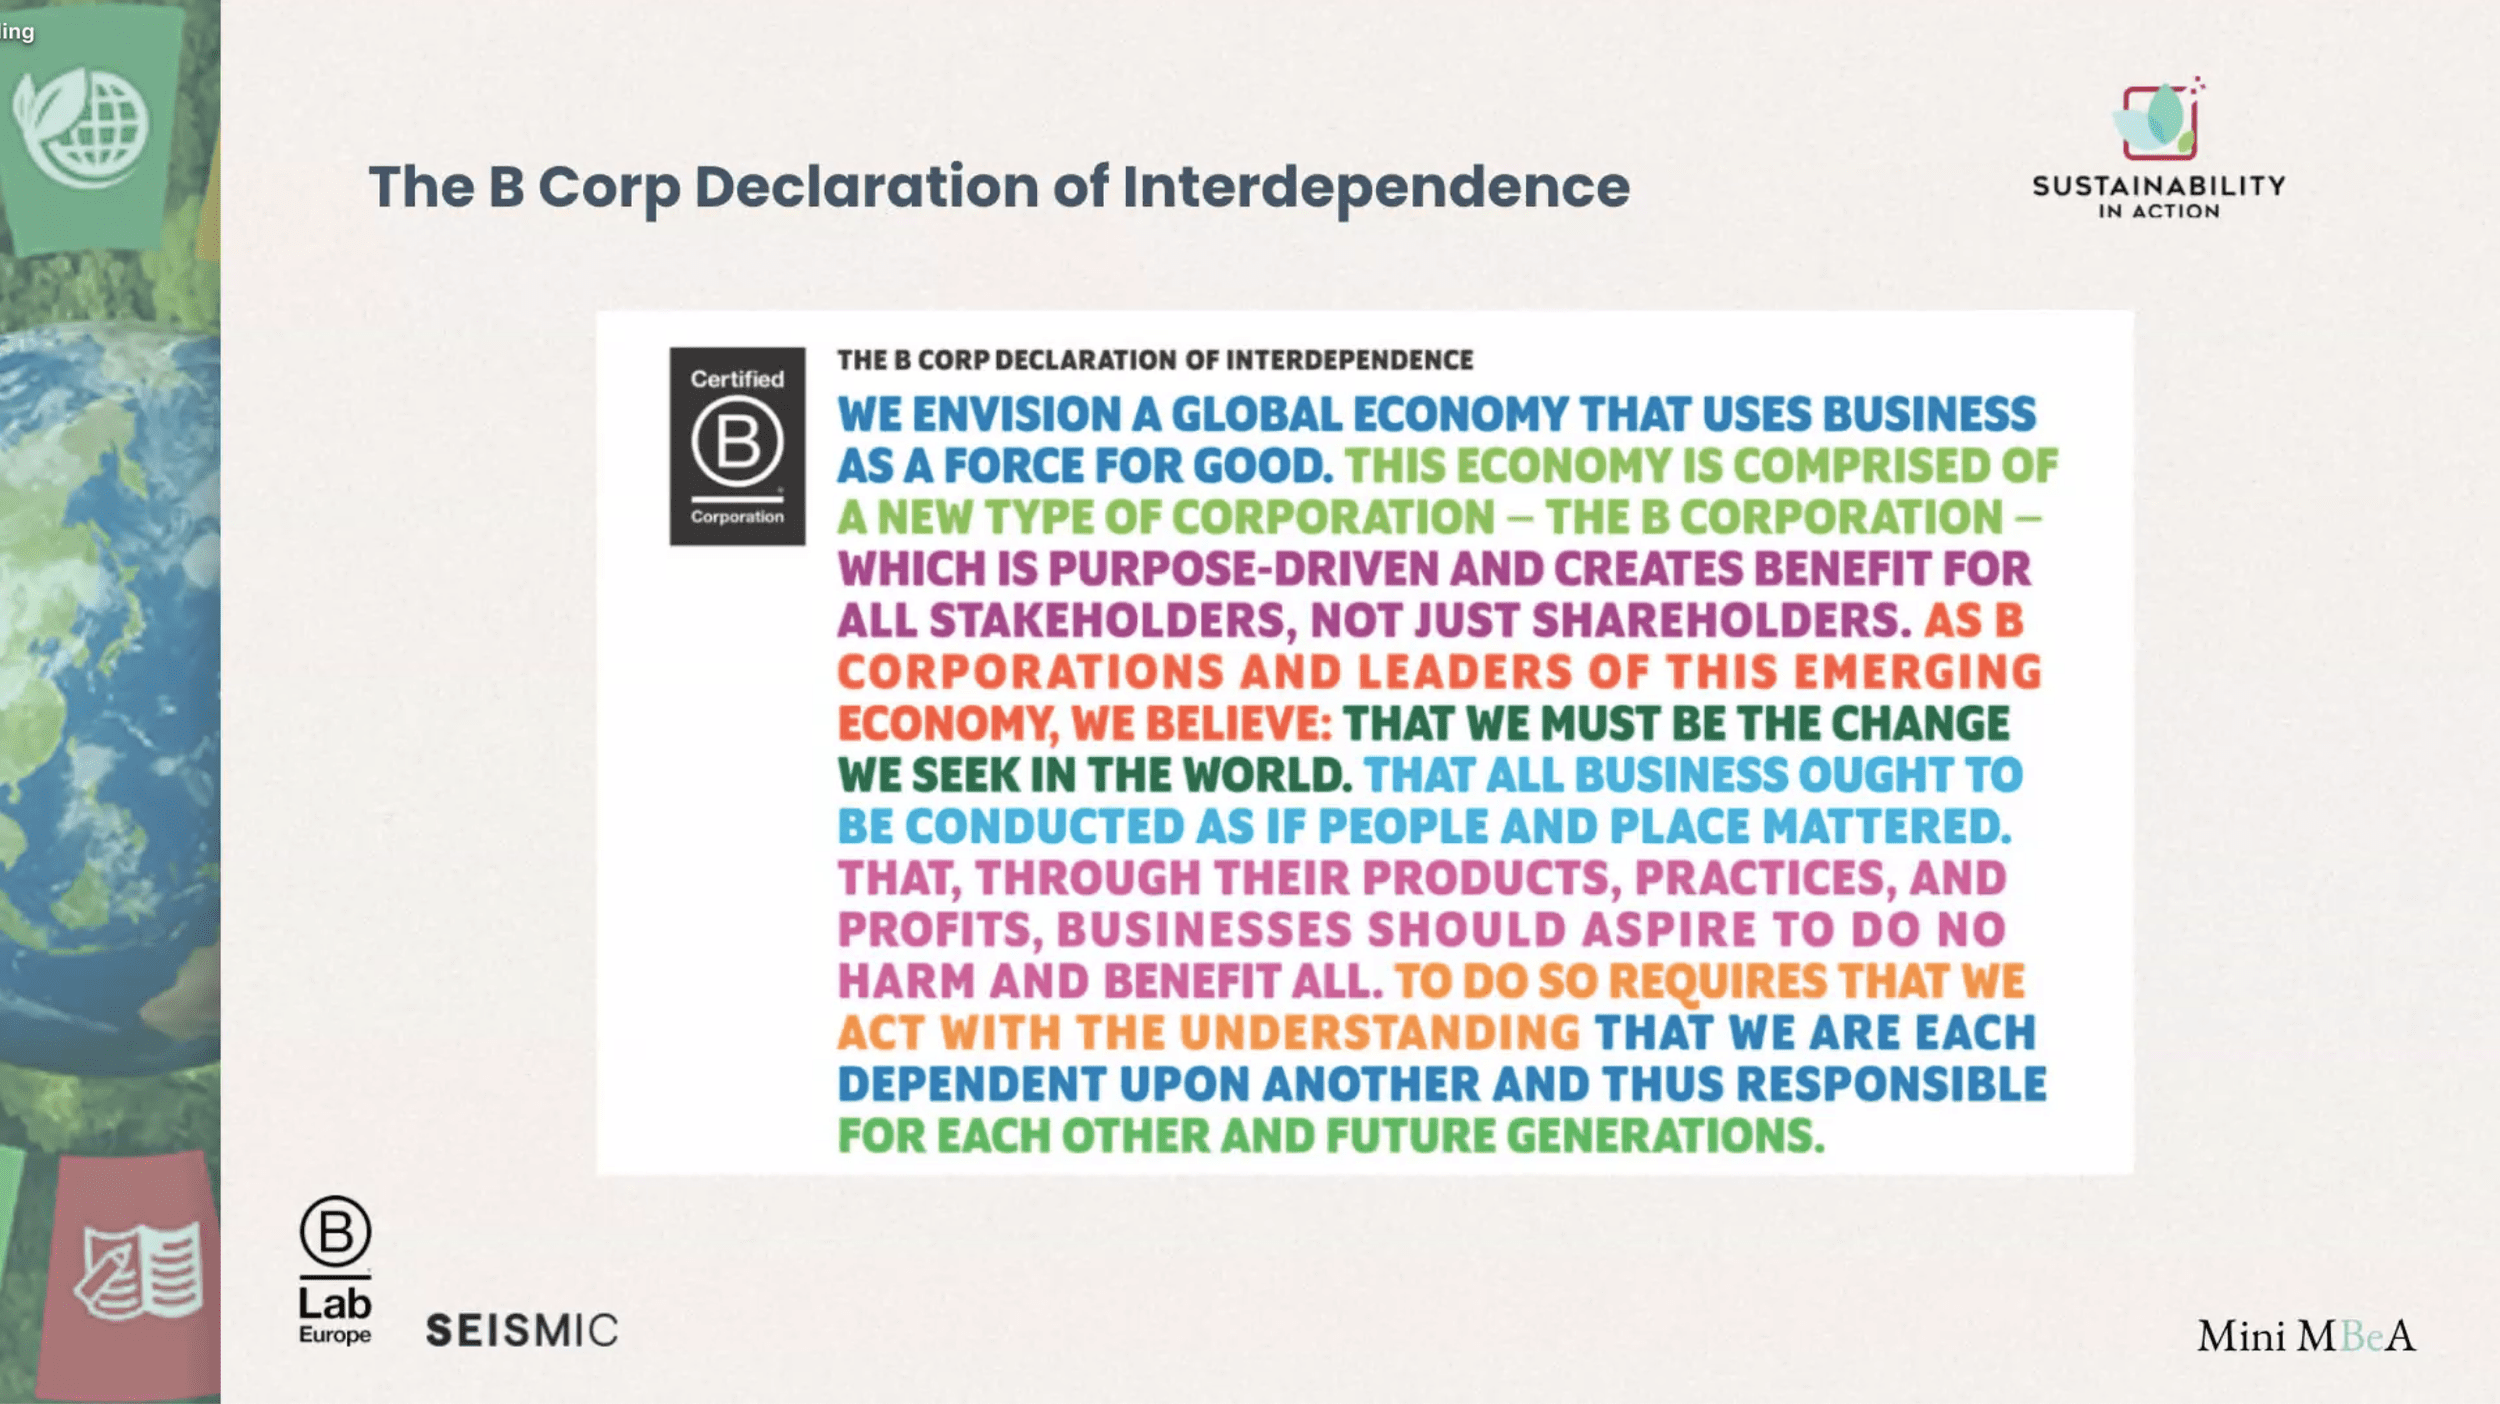 The B Corp Declaration of Interdependence